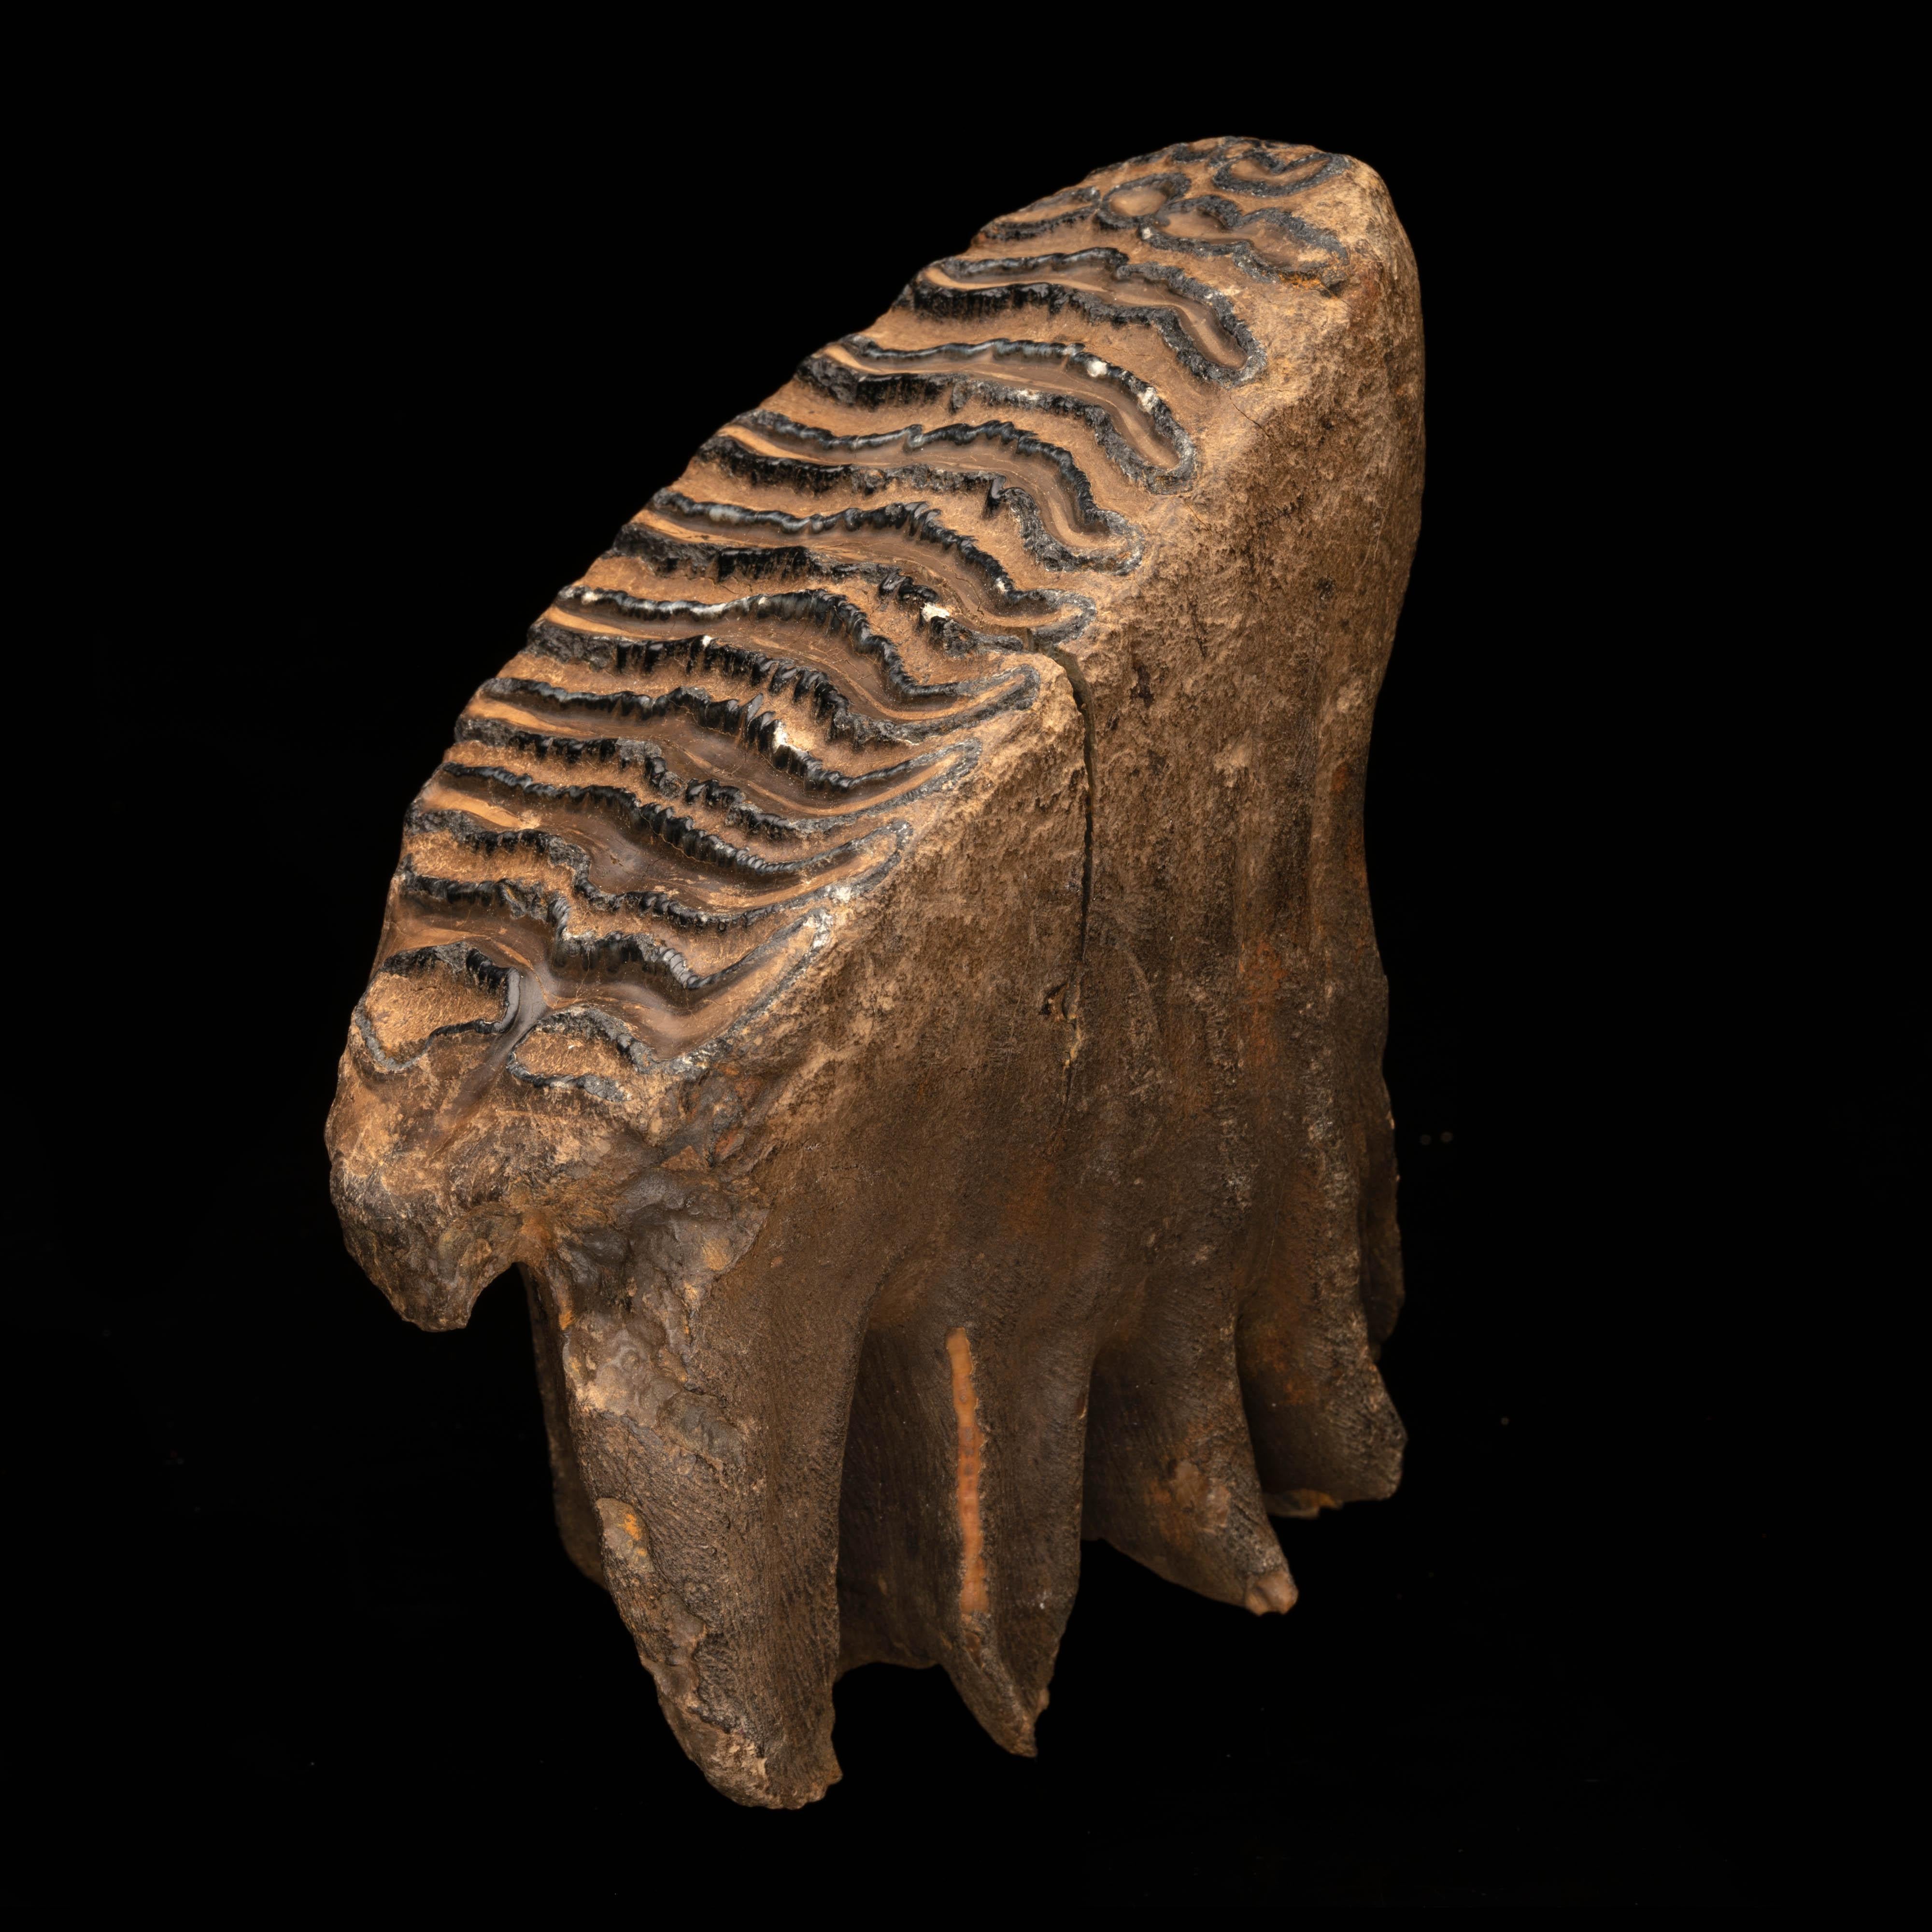 Found in Siberia, this 2.13 lb. specimen is the fossilized molar and root of a woolly mammoth. Incredibly well preserved, you can clearly see the details of the molar and the root. This particular specimen is over 10,000 years old. Gone extinct